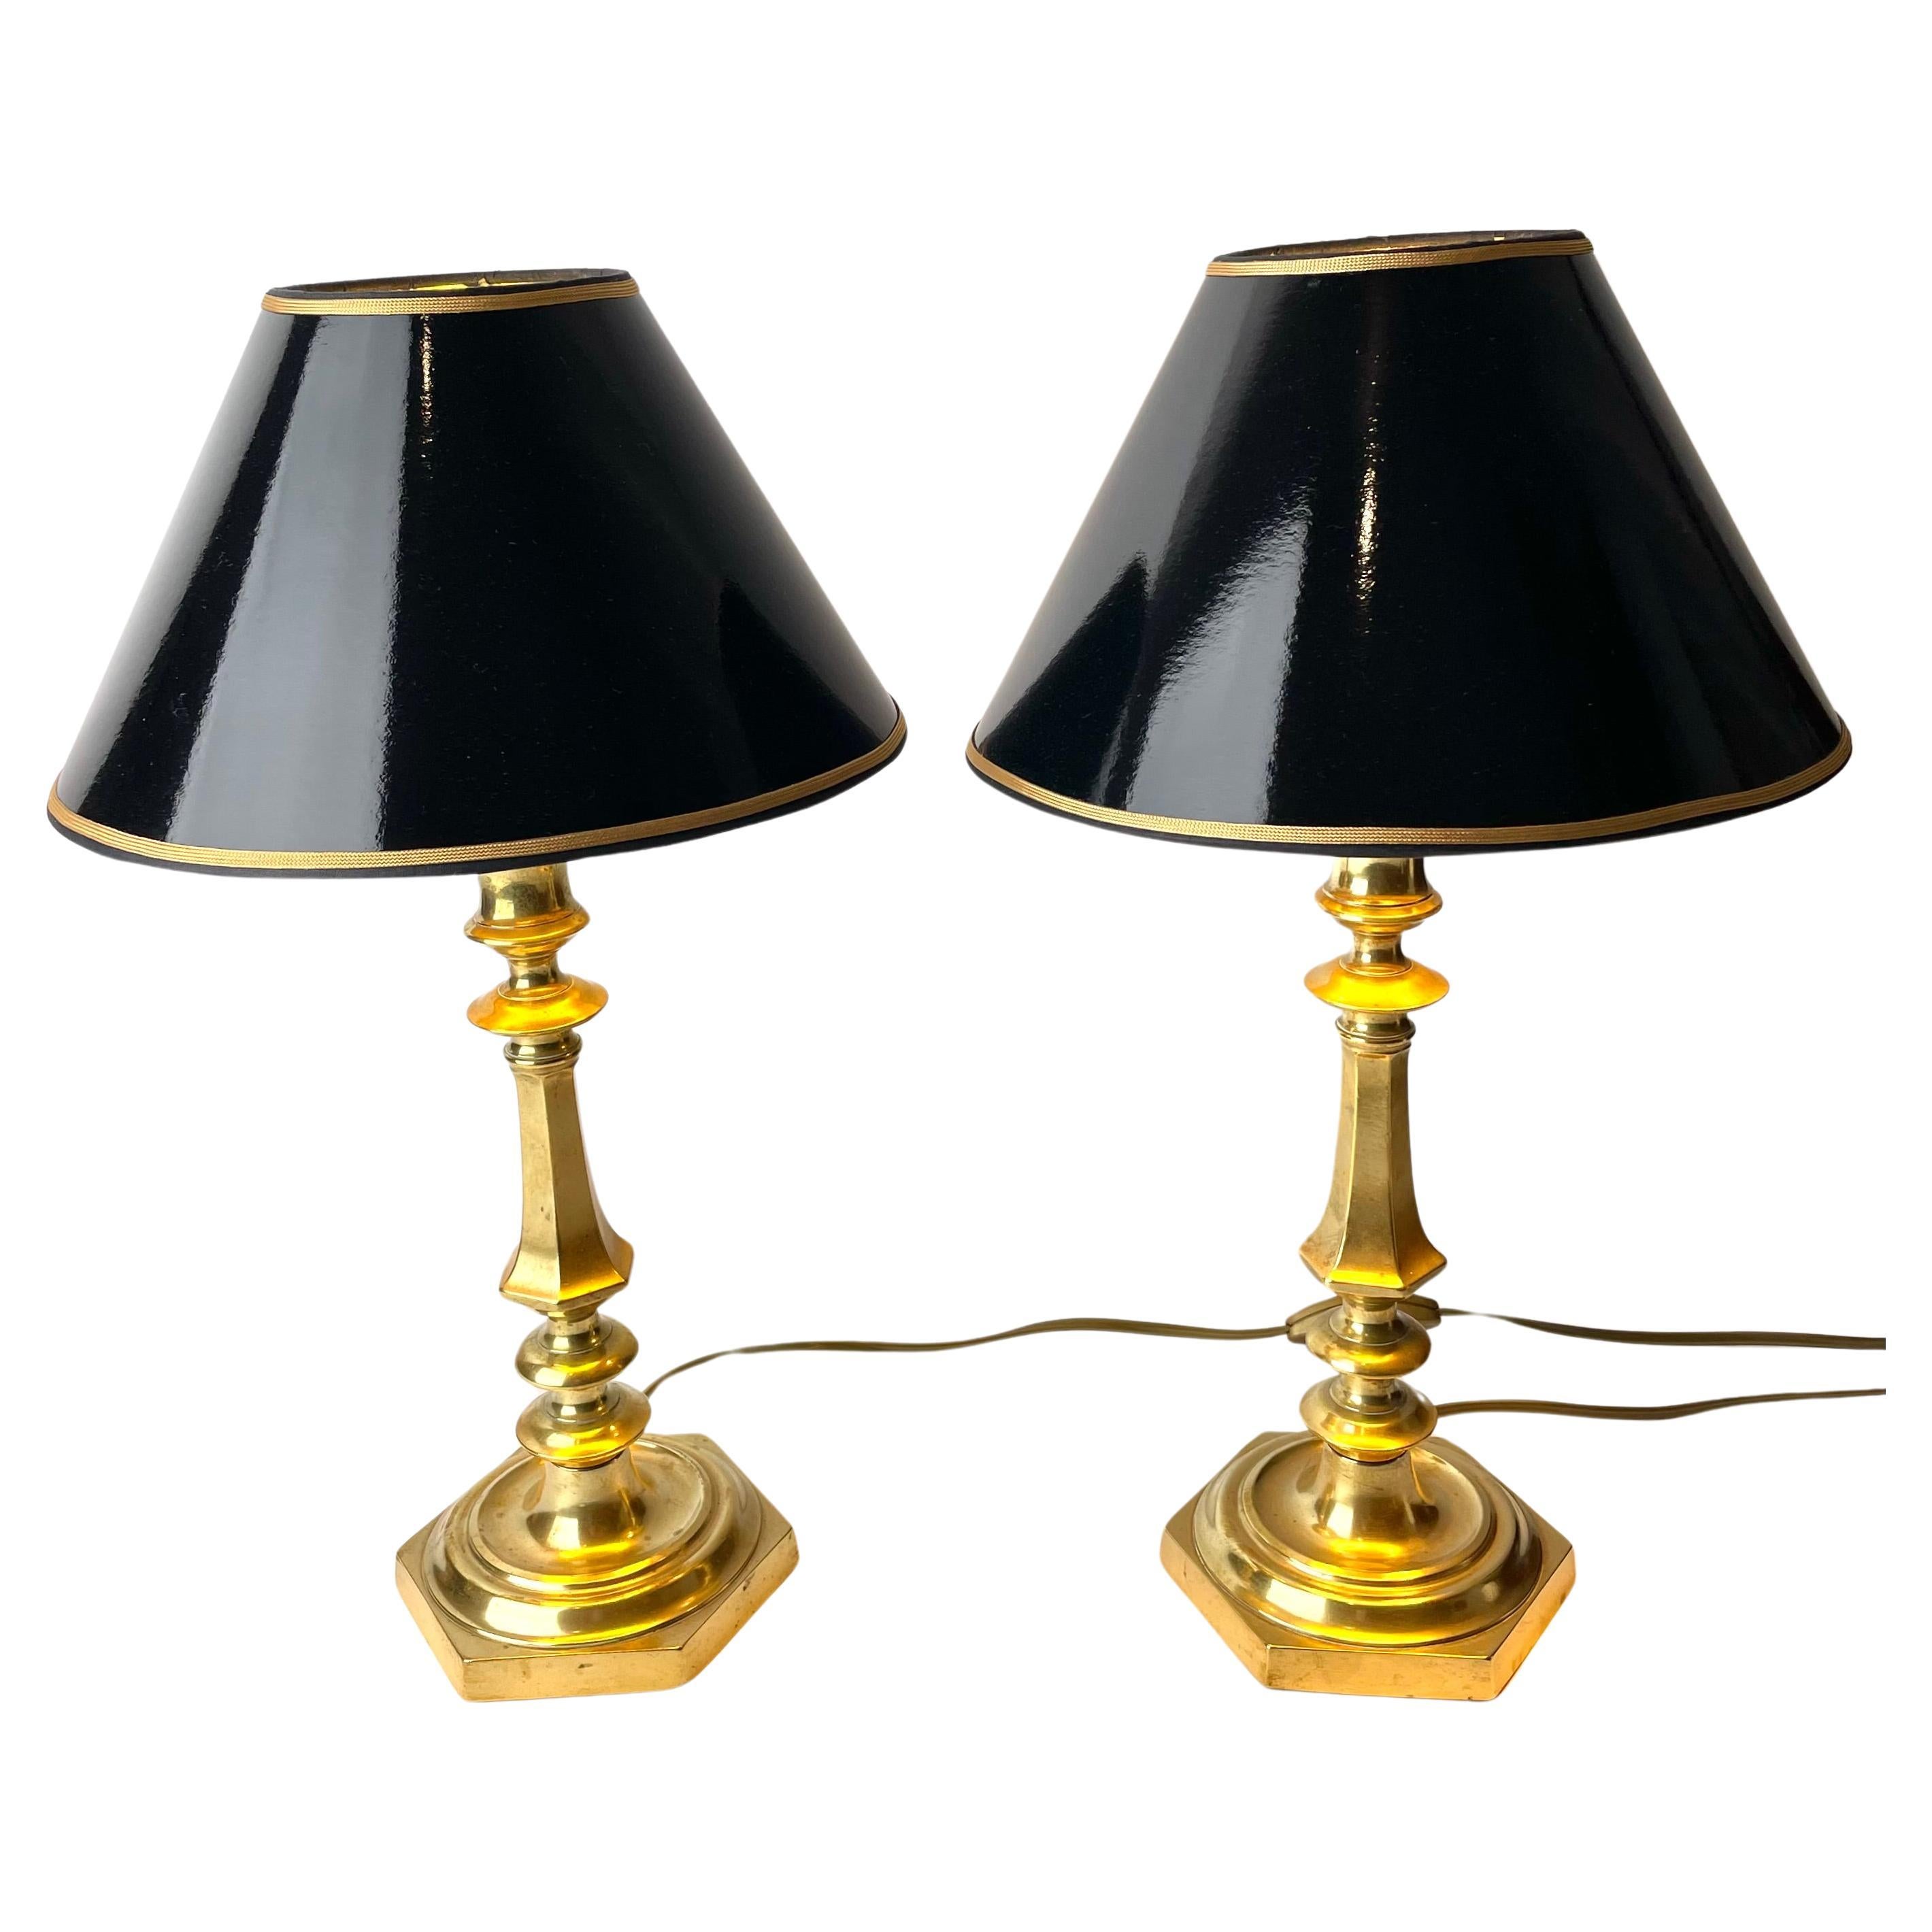 Pair of hexagonal Bronze Table Lamps from Mid-19th Century For Sale